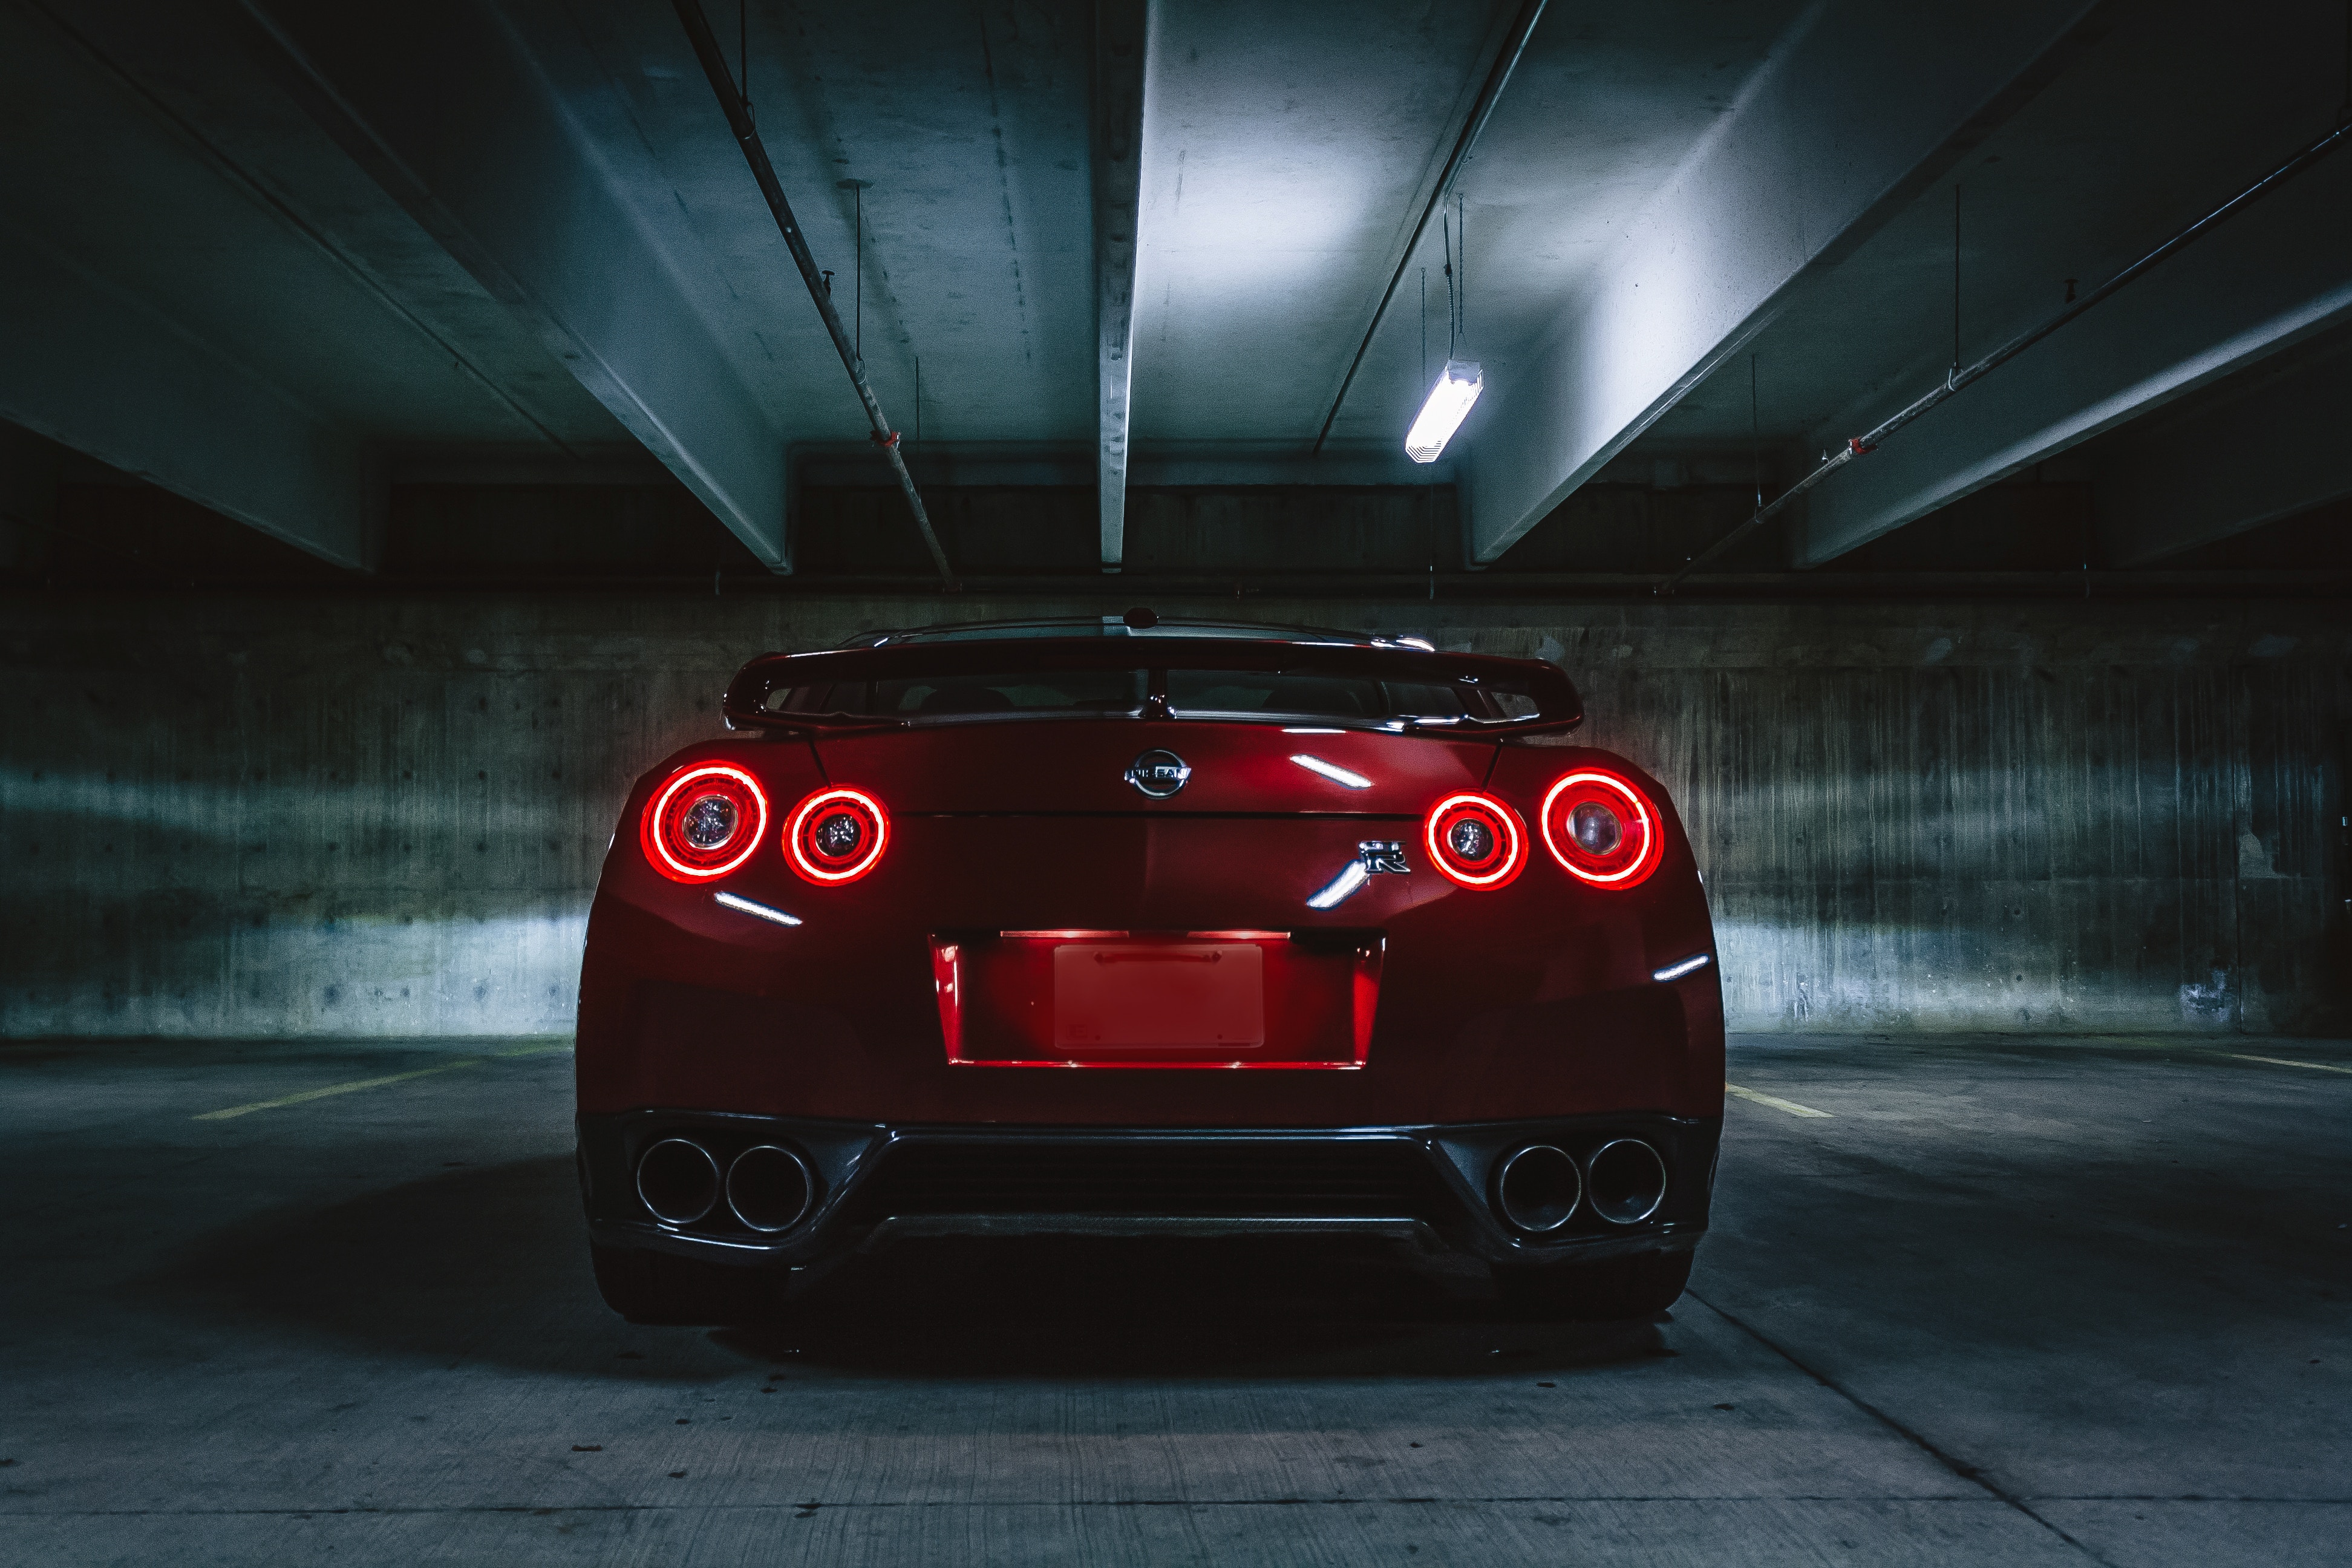 64371 download wallpaper nissan gtr, nissan, cars, lights, dark, back view, rear view, headlights screensavers and pictures for free